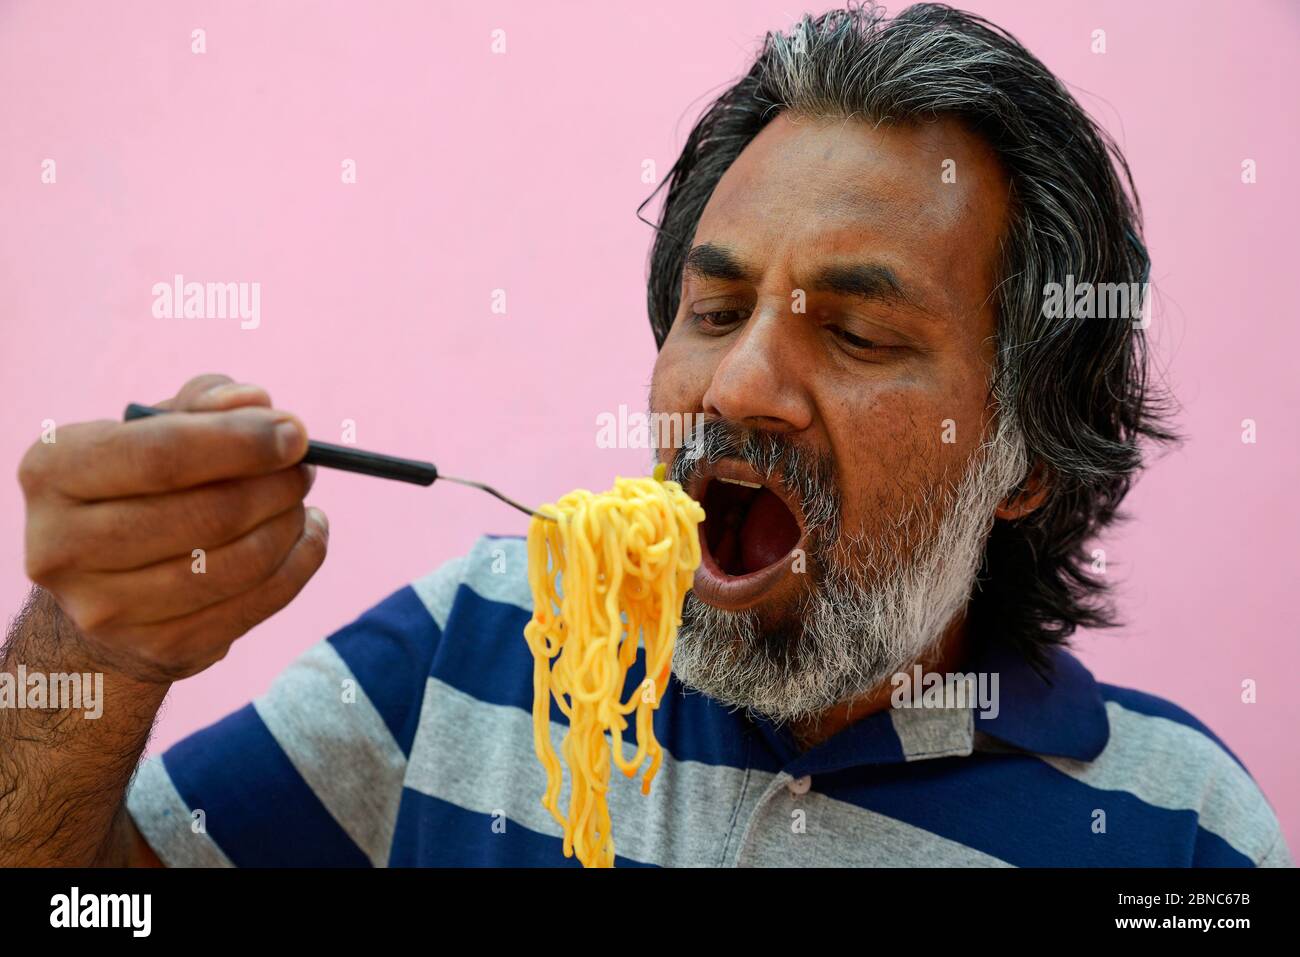 Man eating Noodles Stock Photo